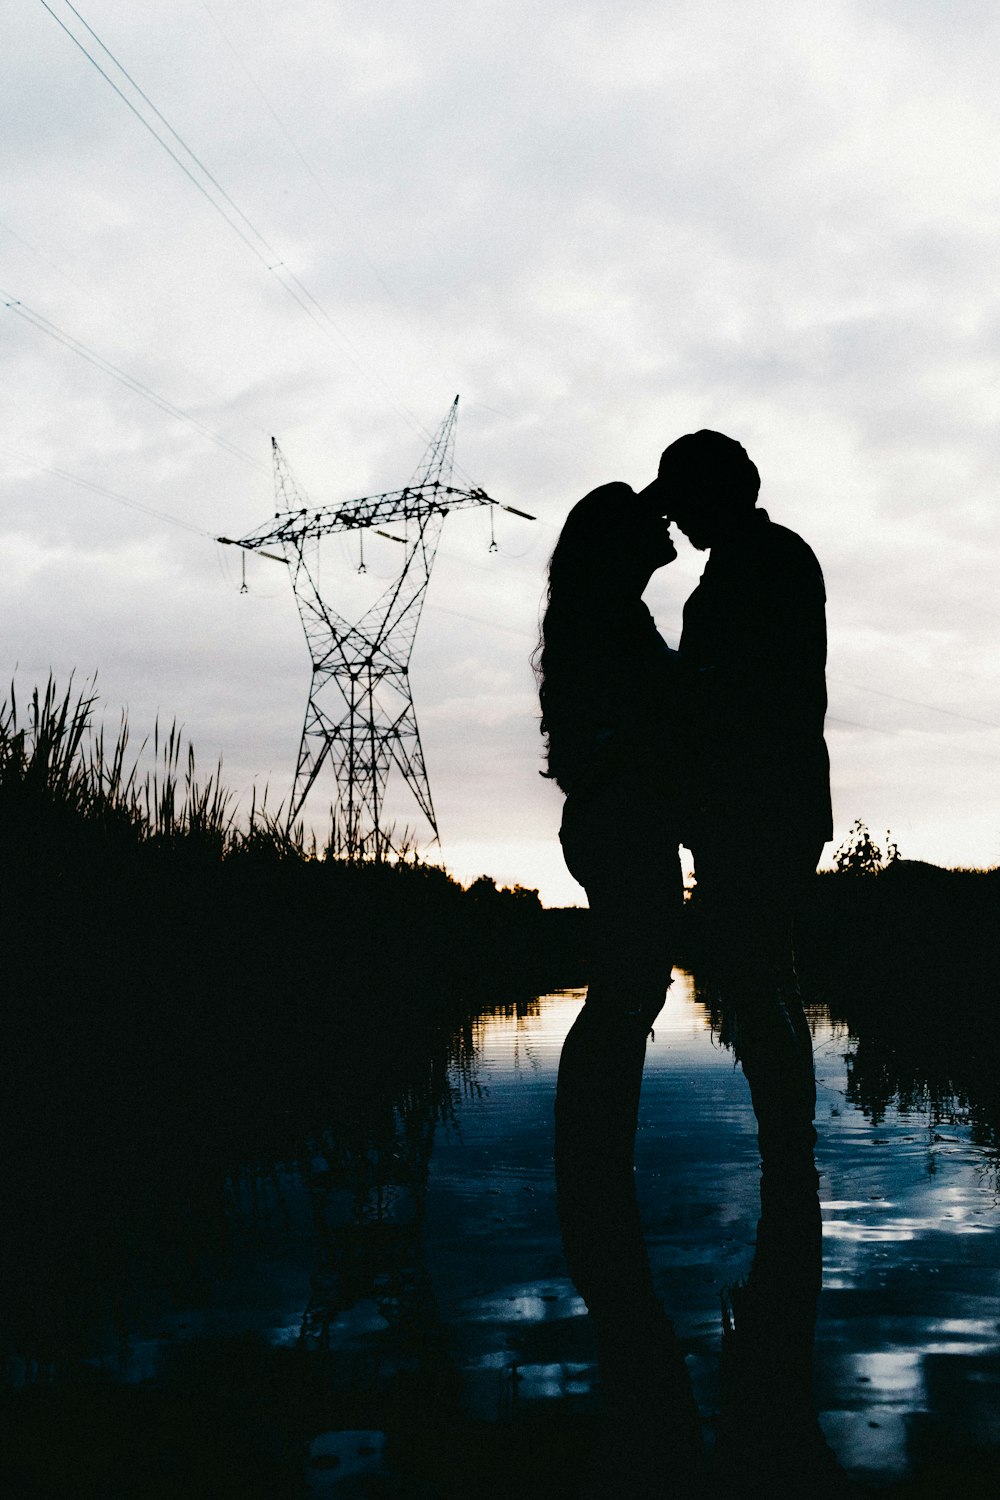 silhouette of man and woman standing near body of water during daytime